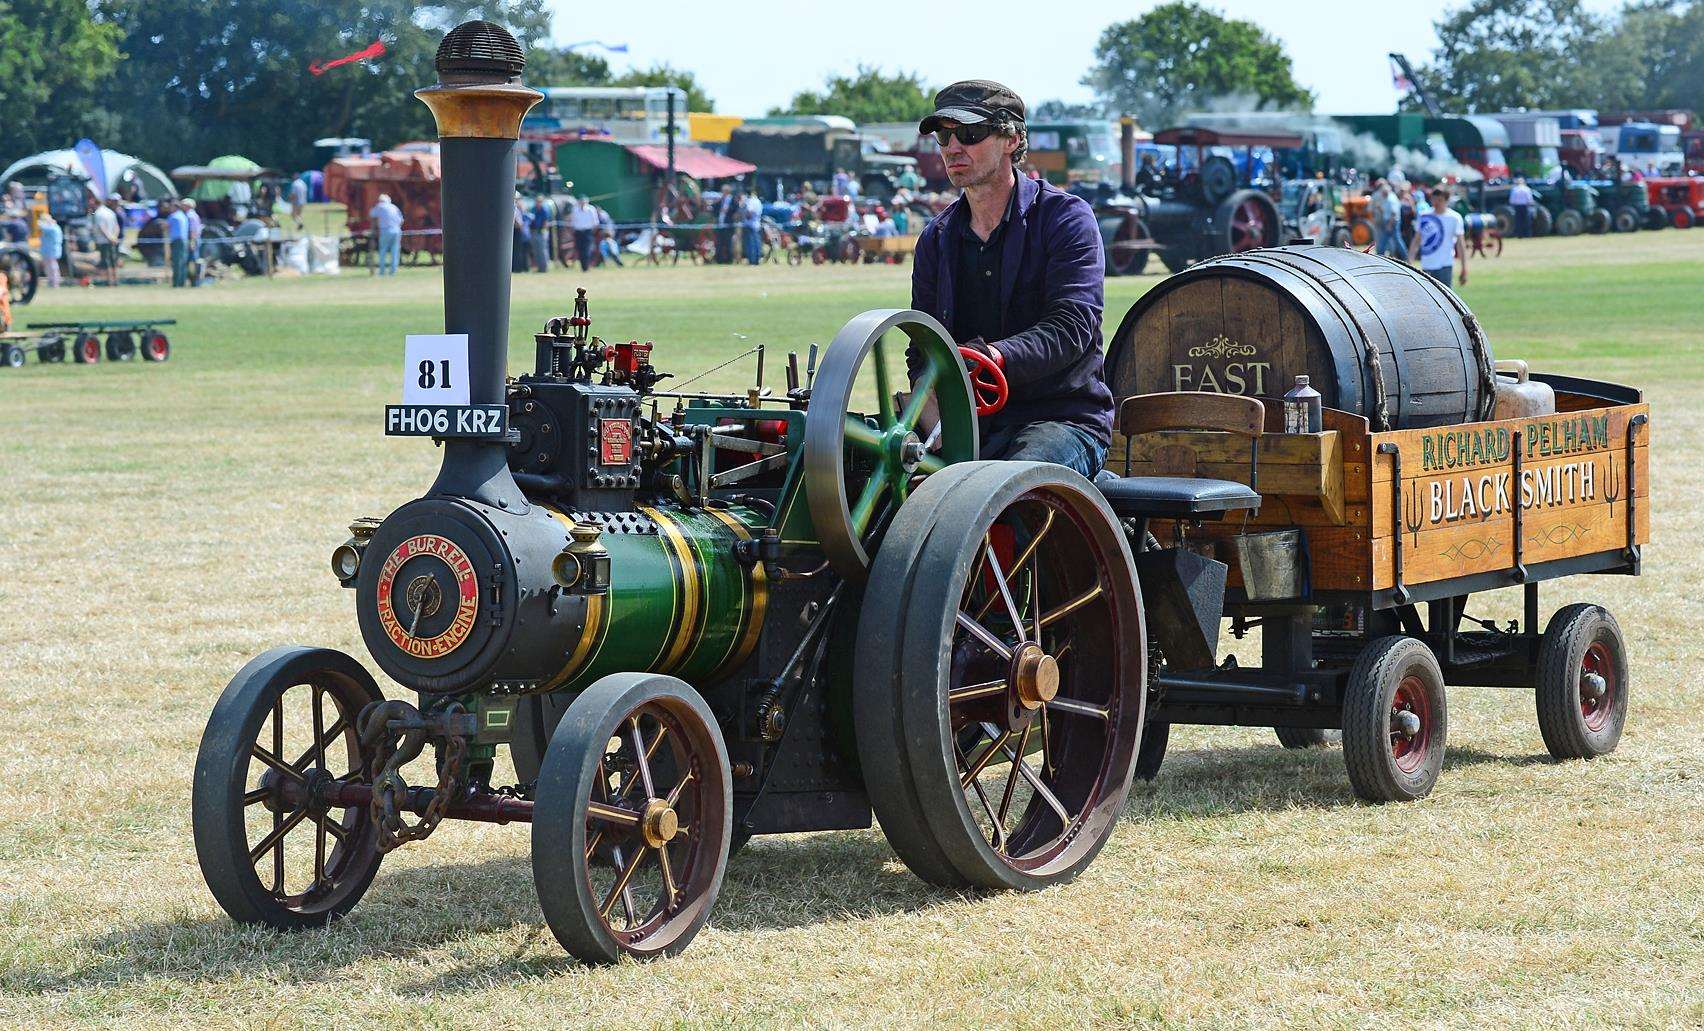 There will be all types of steam machines at the Weald of Kent Steam Rally